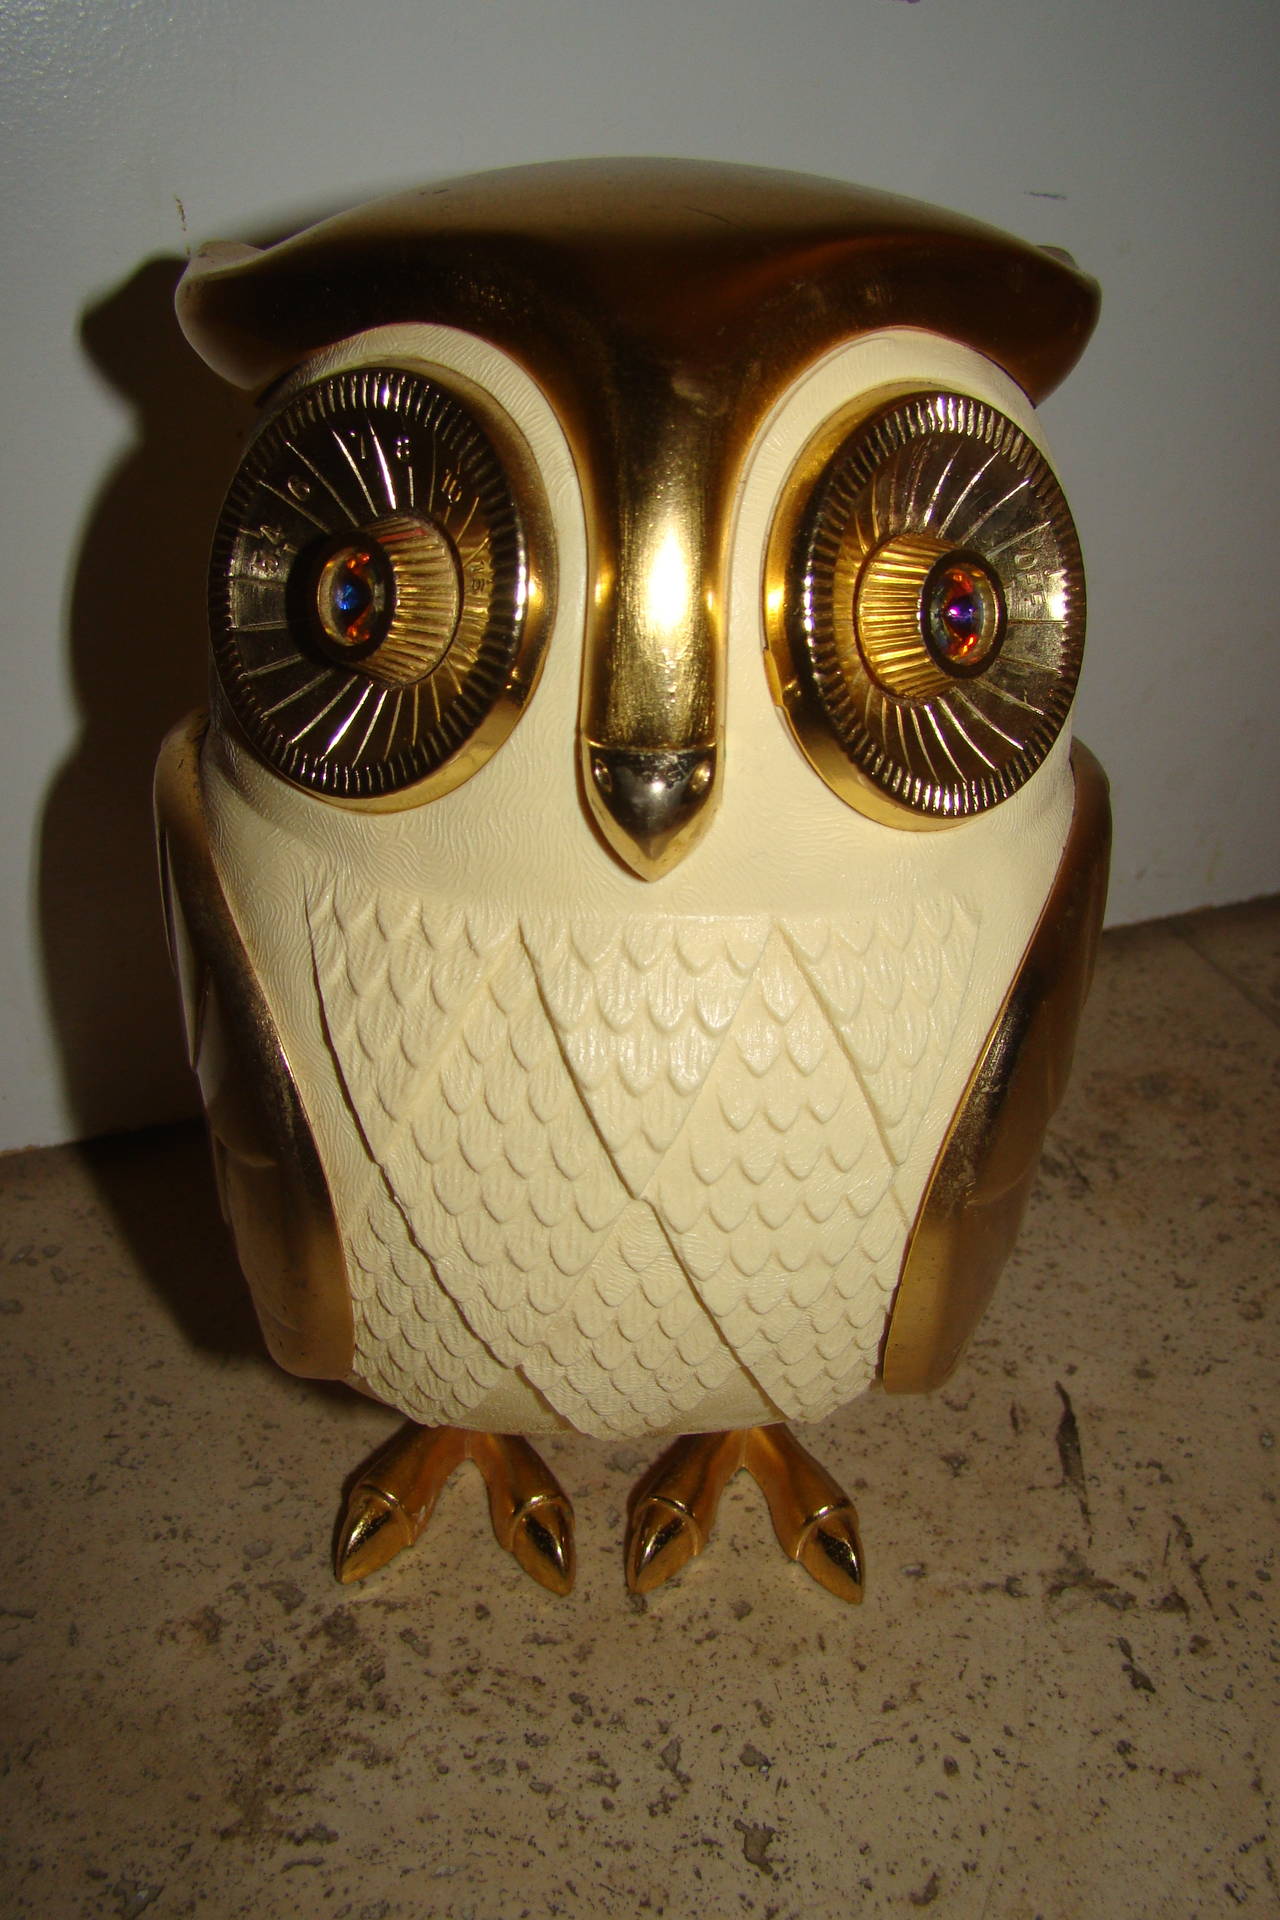 Terrific vintage owl transistor radio. This super cute design is comprised of brass and plastic with jeweled eyes in the form of an owl. The legs come off to reveal the battery compartment. Radio works! Truly a unique design in person.